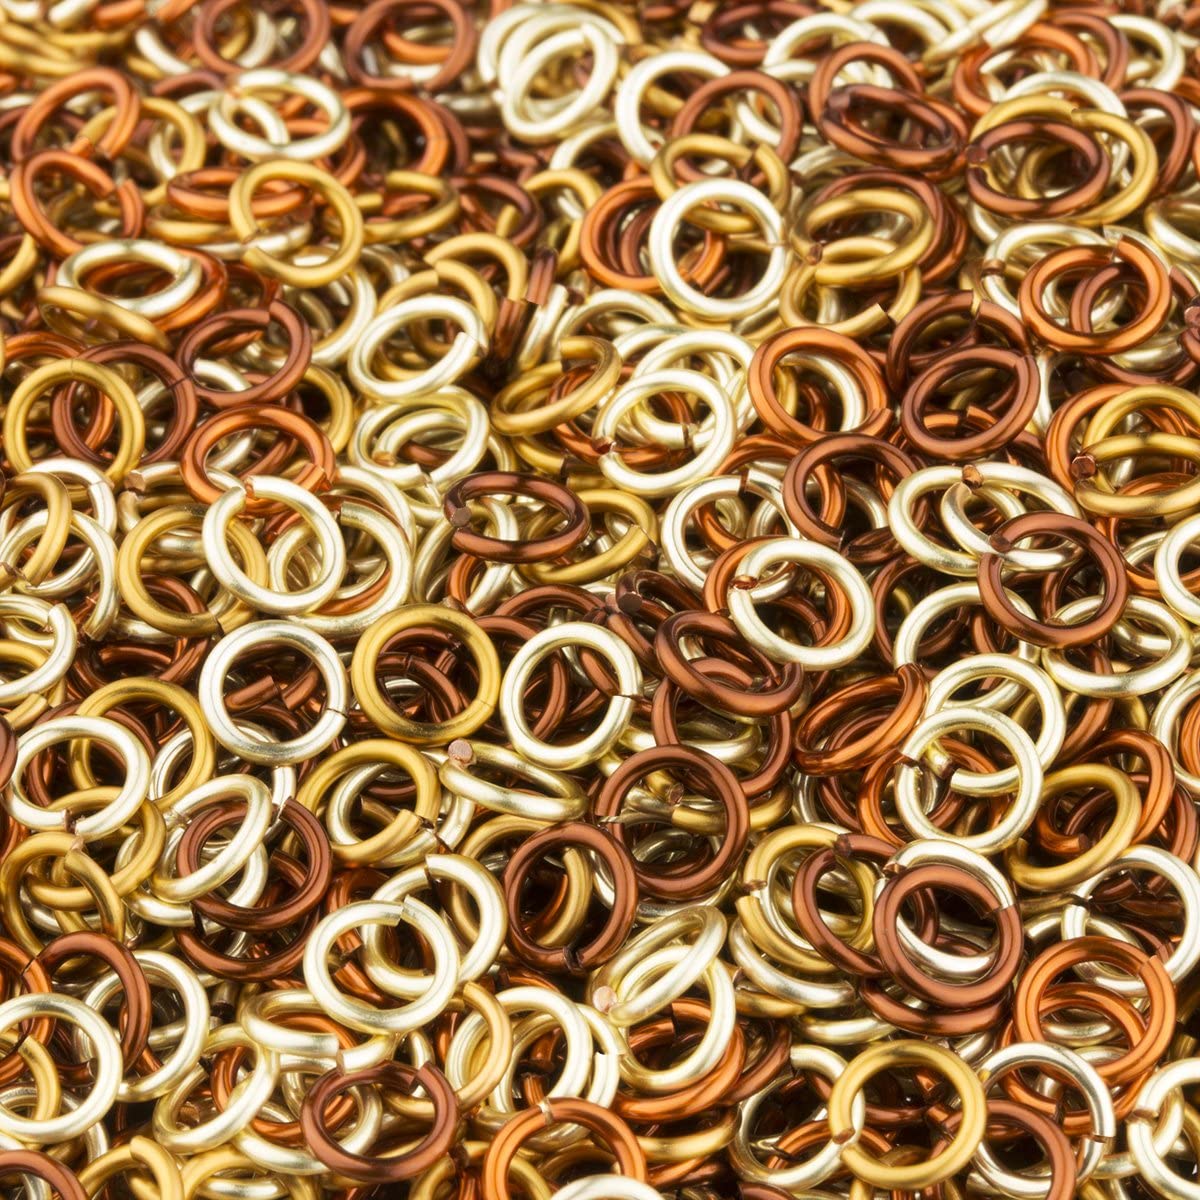 Weave Got Maille, 18-Gauge 3.5mm Pirate’s Gold Enameled Copper Jump Ring Mix – 1 oz